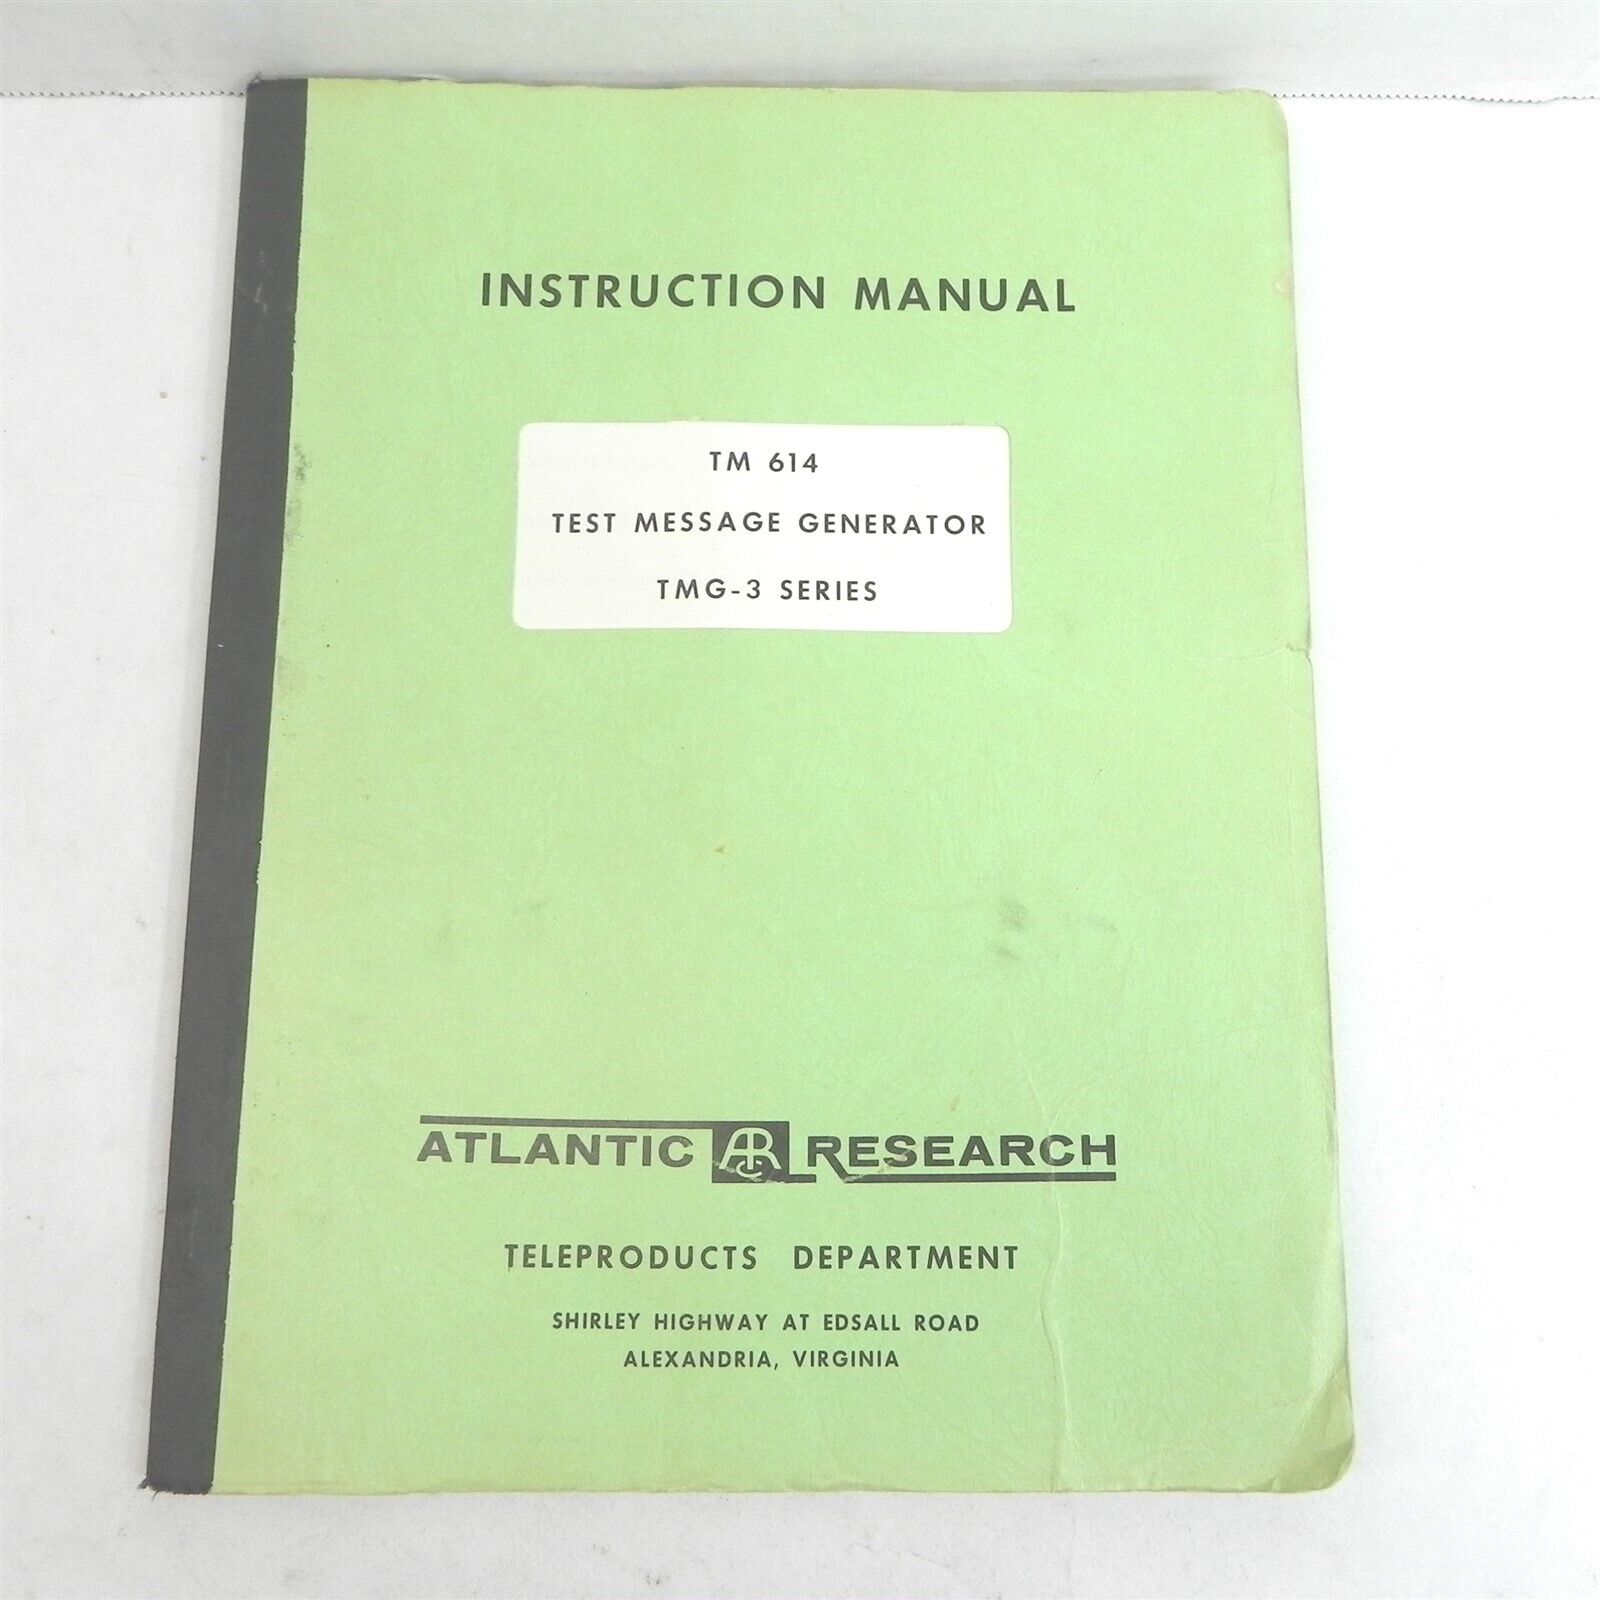 1967 INSTRUCTION MANUAL FOR TM614 TEST MESSAGE GENERATOR ATLANTIC RESEARCH CORP